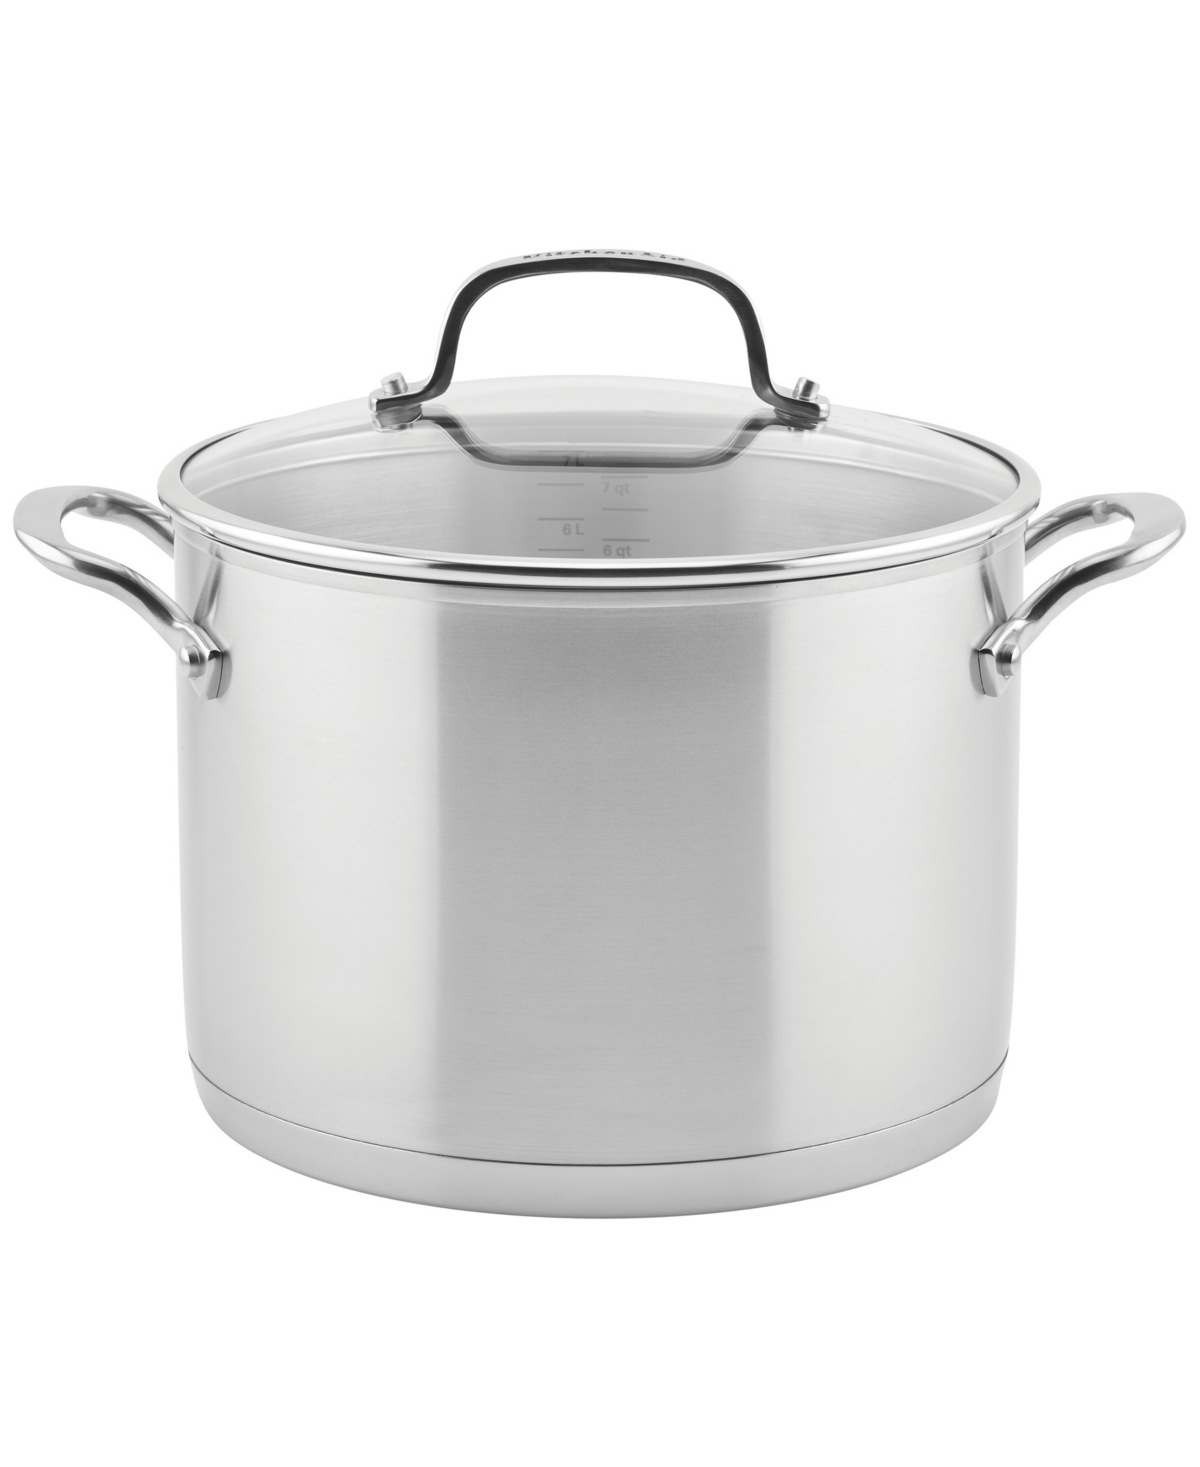 KitchenAid 3-Ply Base Stainless Steel 8 Quart Induction Stockpot with Lid